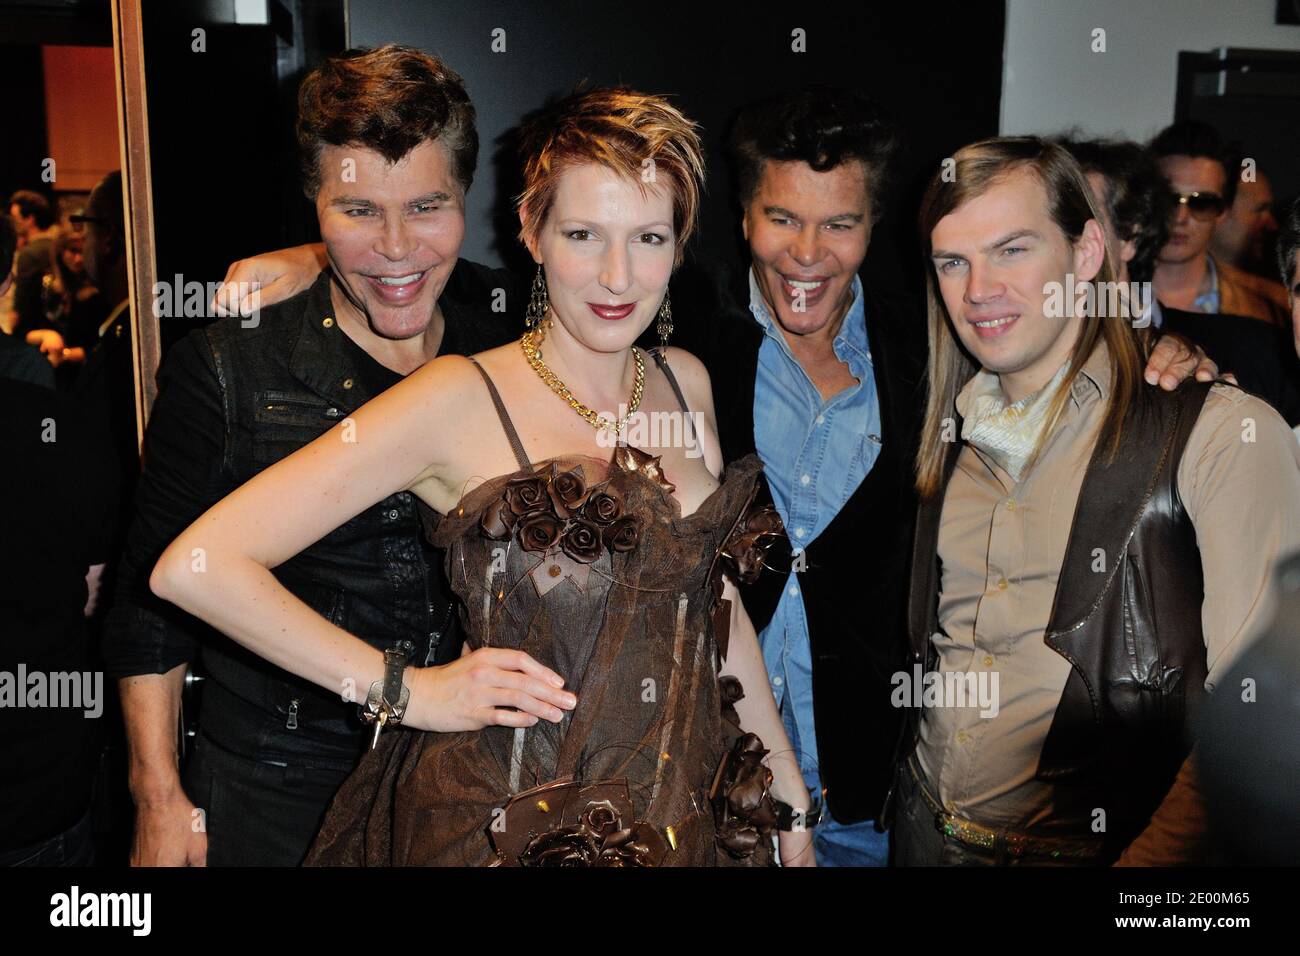 Exclusive - Natacha Polony Igor, Grichka Bogdanoff and Christophe Guillarme posing backstage during the 19th Salon Du Chocolat opening in Paris, France on October 29, 2013. Photo by Alban Wyters/ABACAPRESS.COM Stock Photo